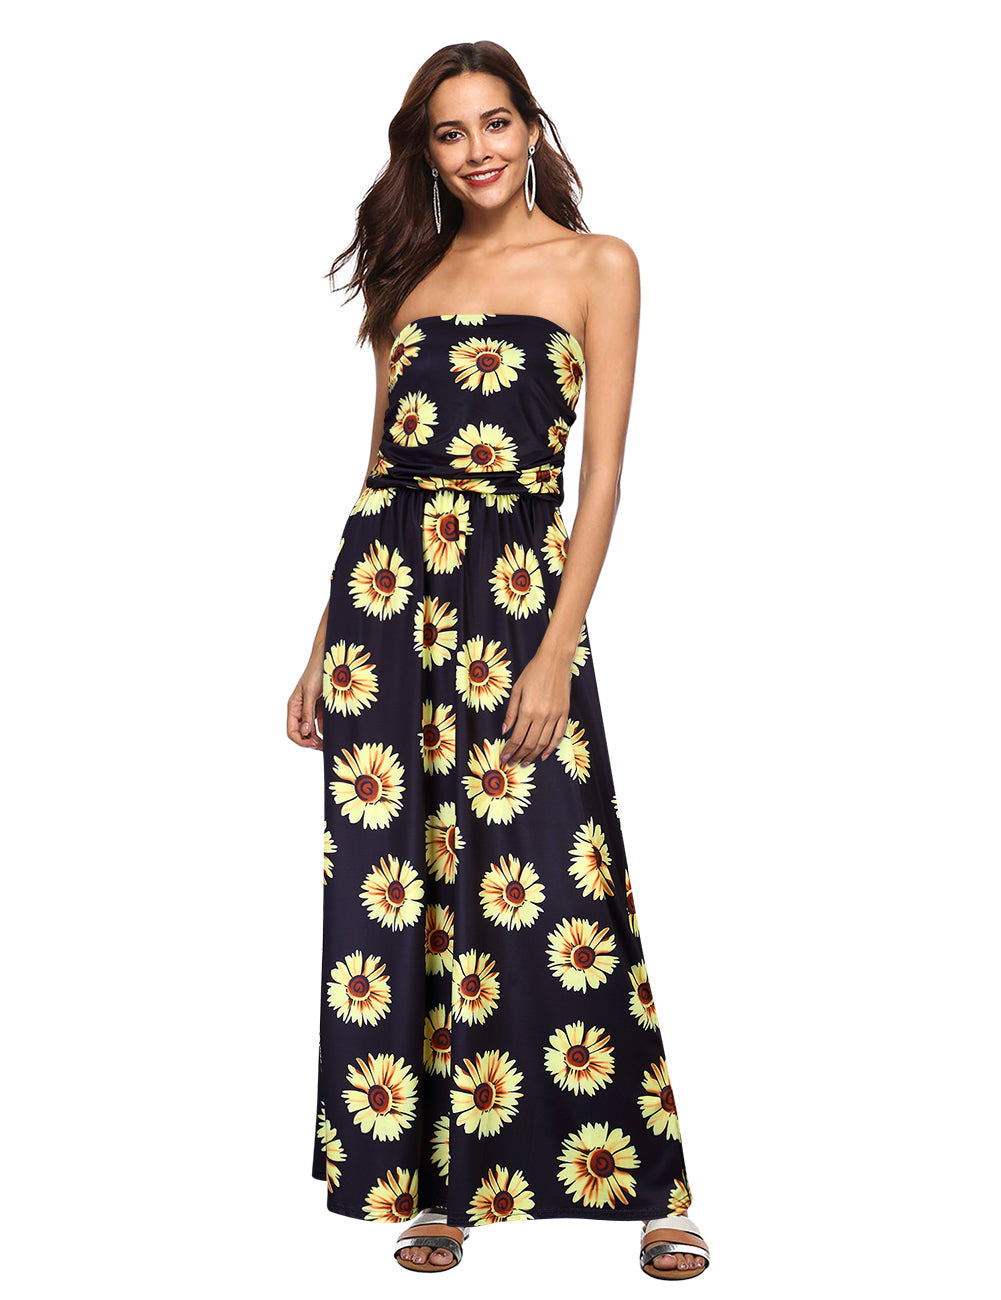 YESFASHION Women's Strapless Graceful Floral Party Maxi Long Dress Black